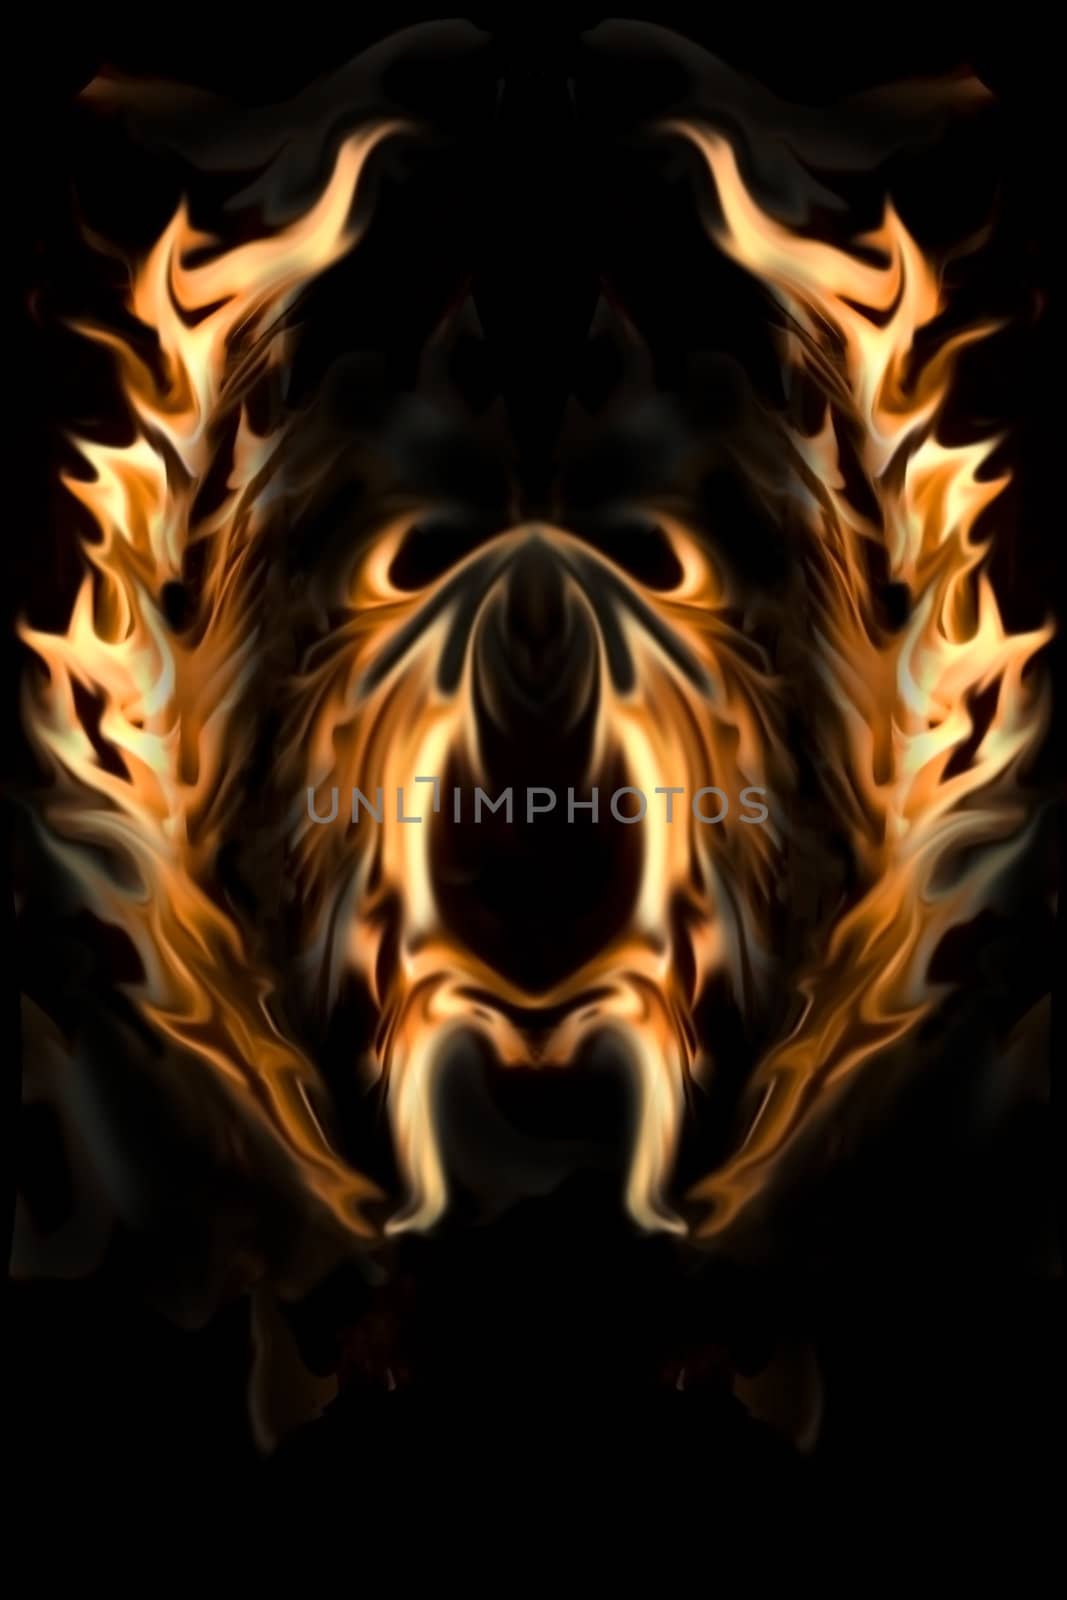 Flaming Wings of Fire and Flames Background.